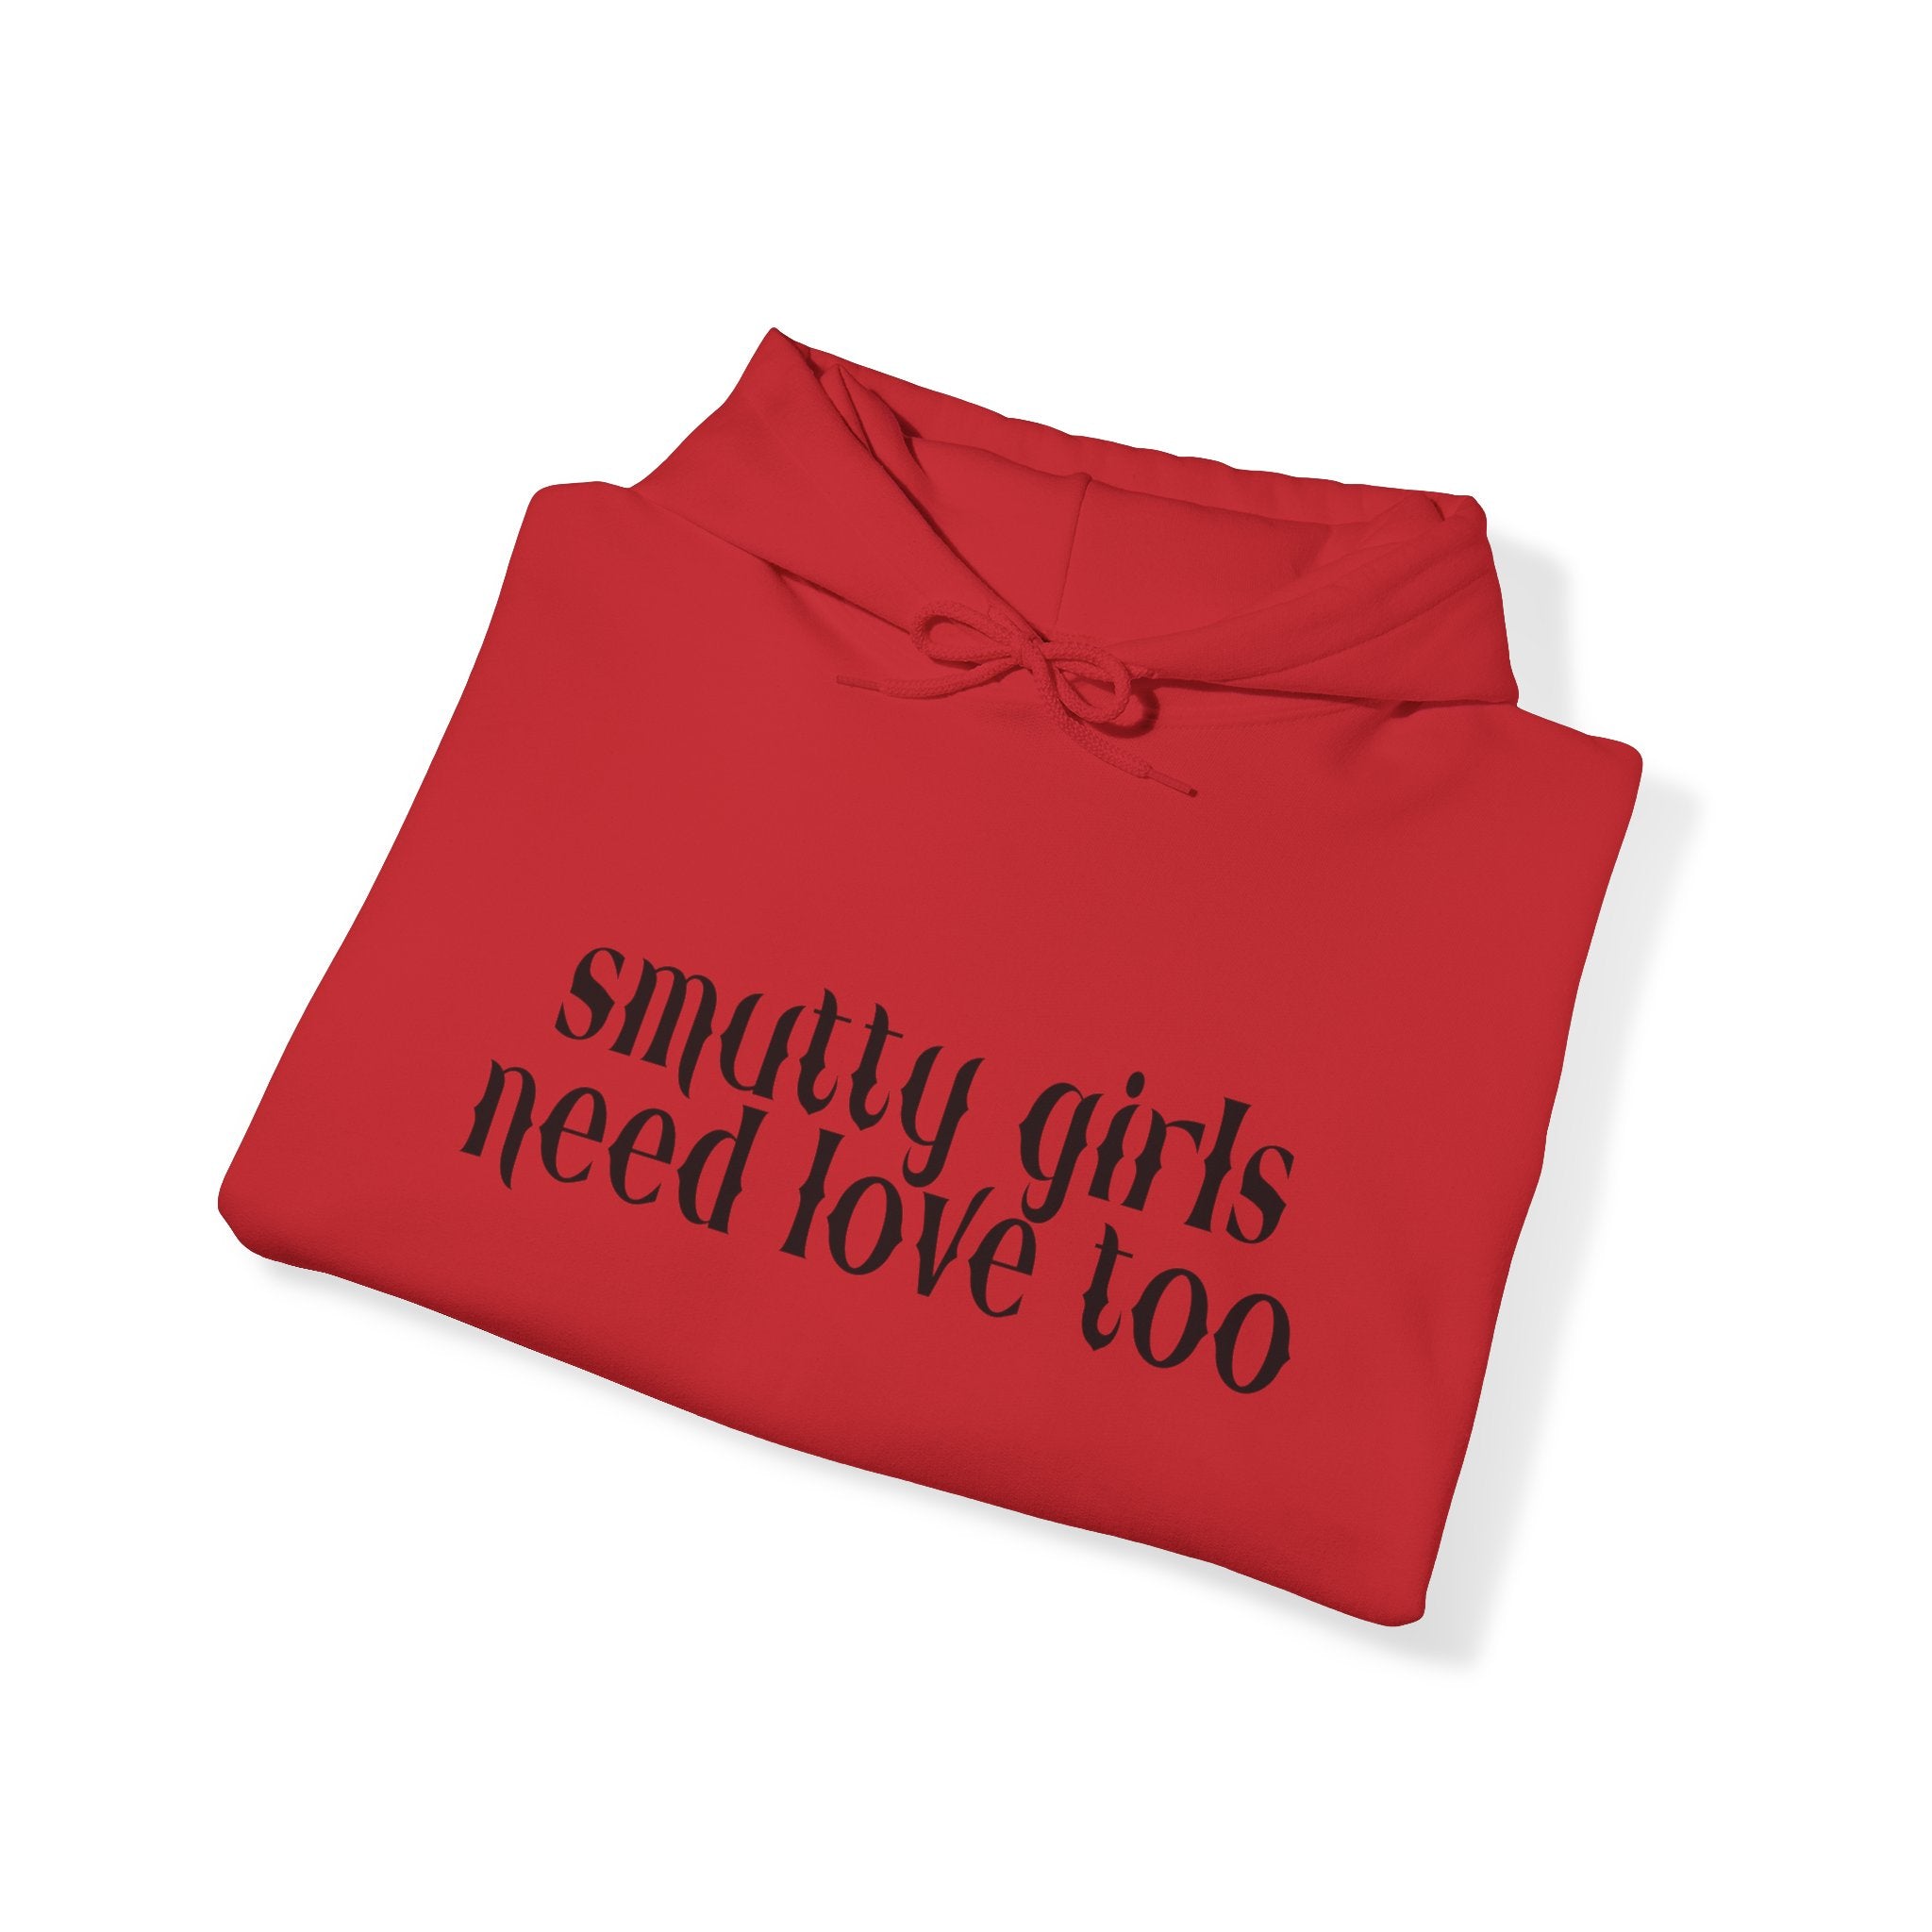 Smutty Girl Hoodie